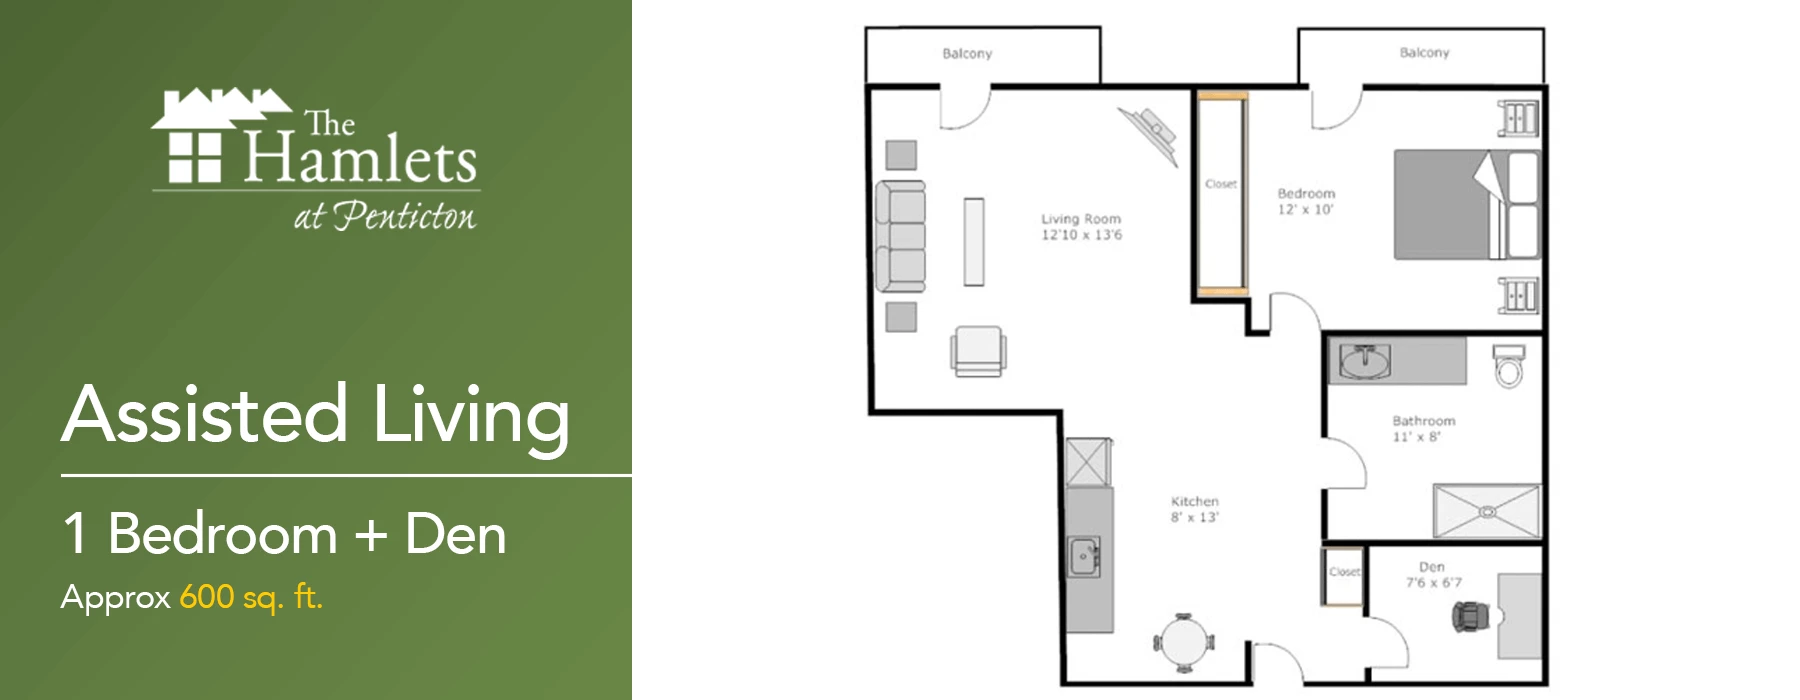 One bedroom with a den plan